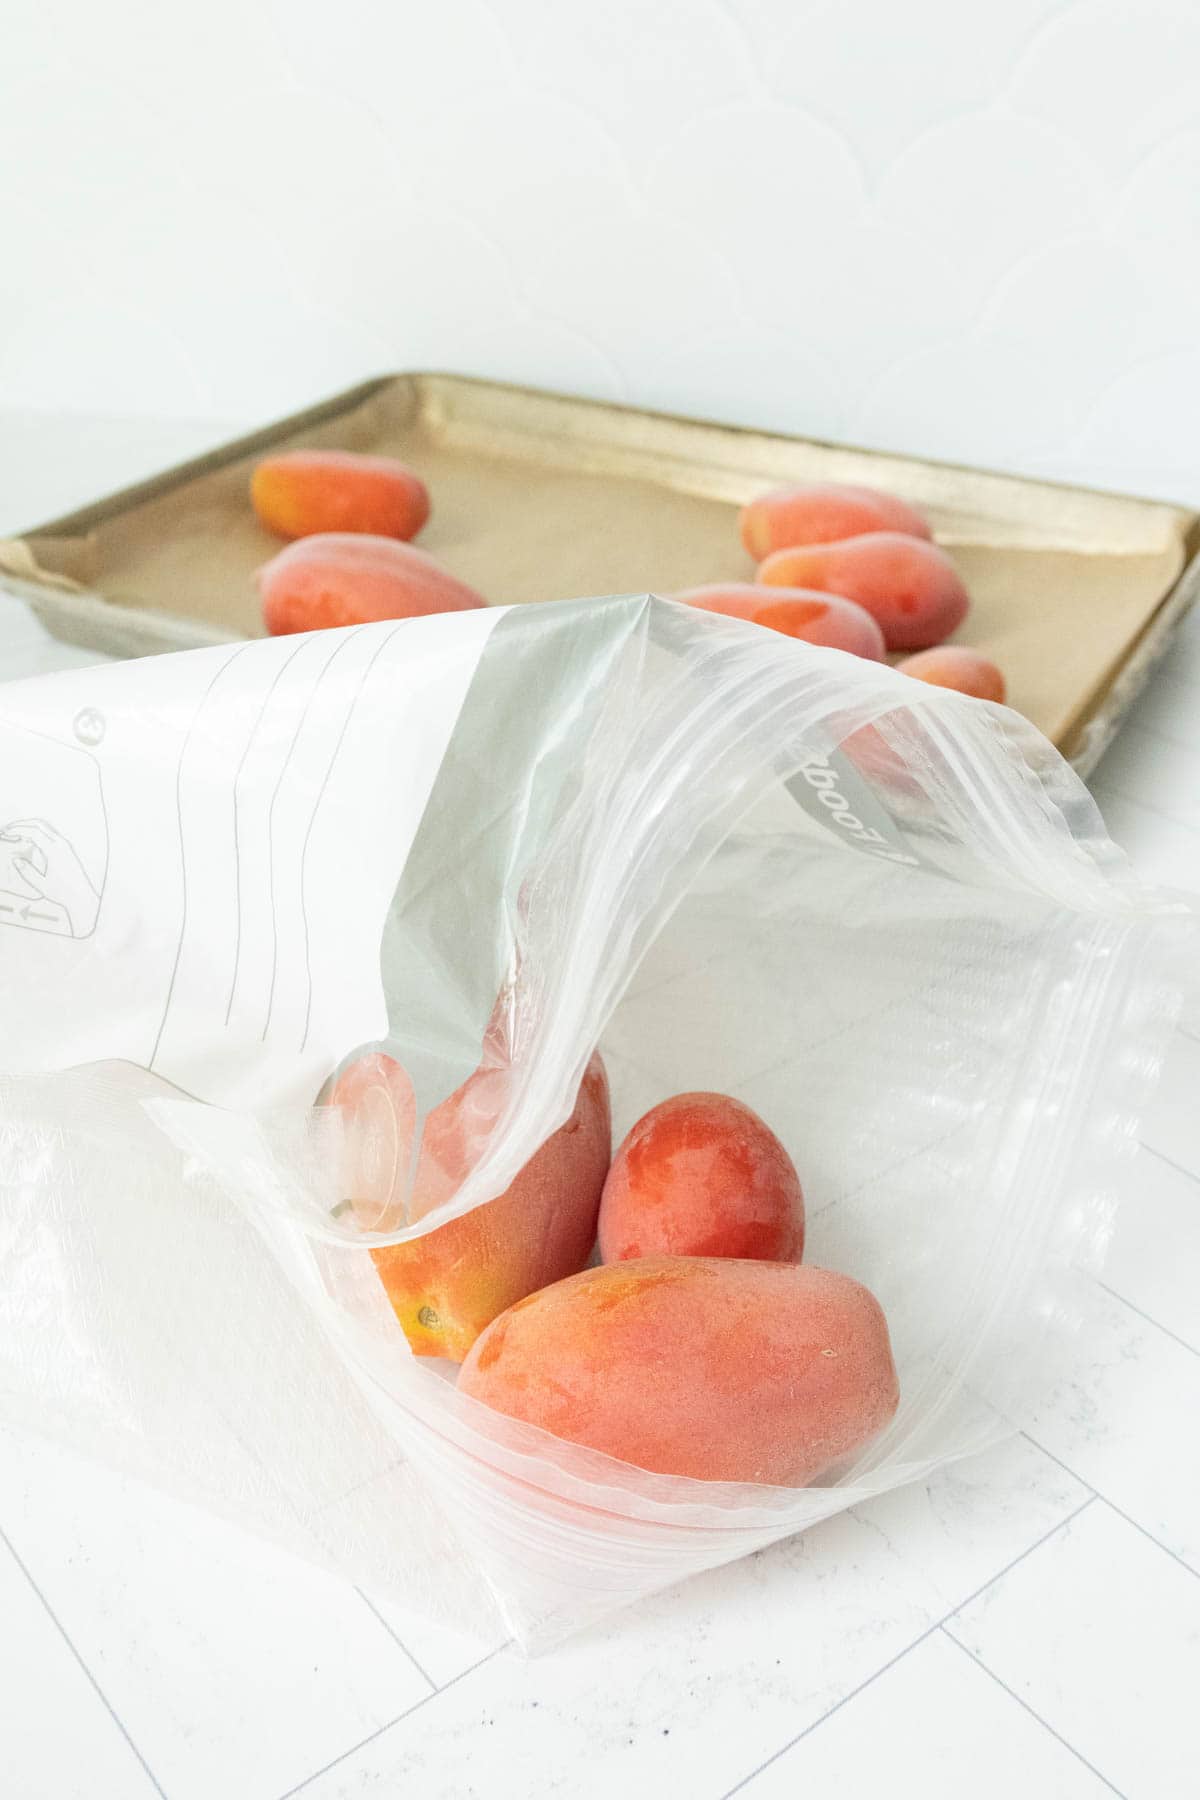 Frozen tomatoes in a plastic bag on top of a baking sheet.